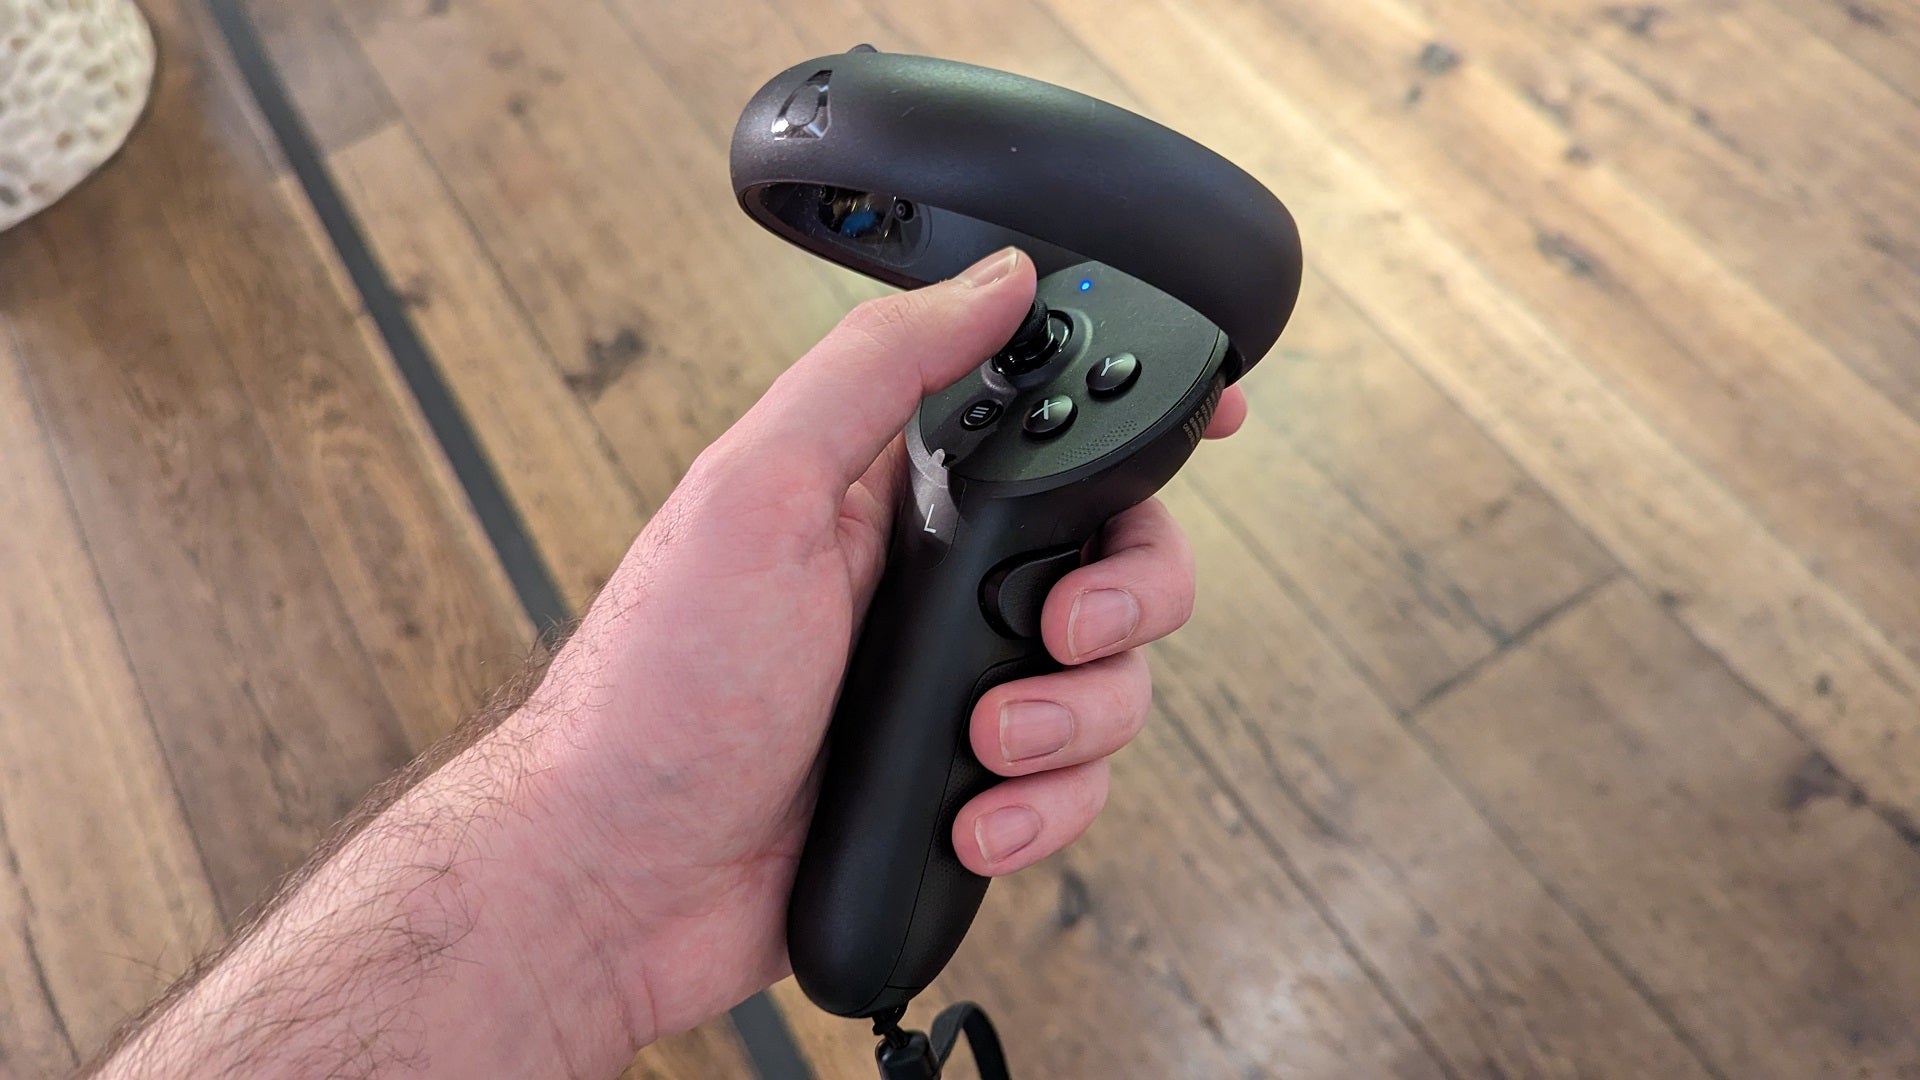 A Vive XR Elite controller held in one hand.